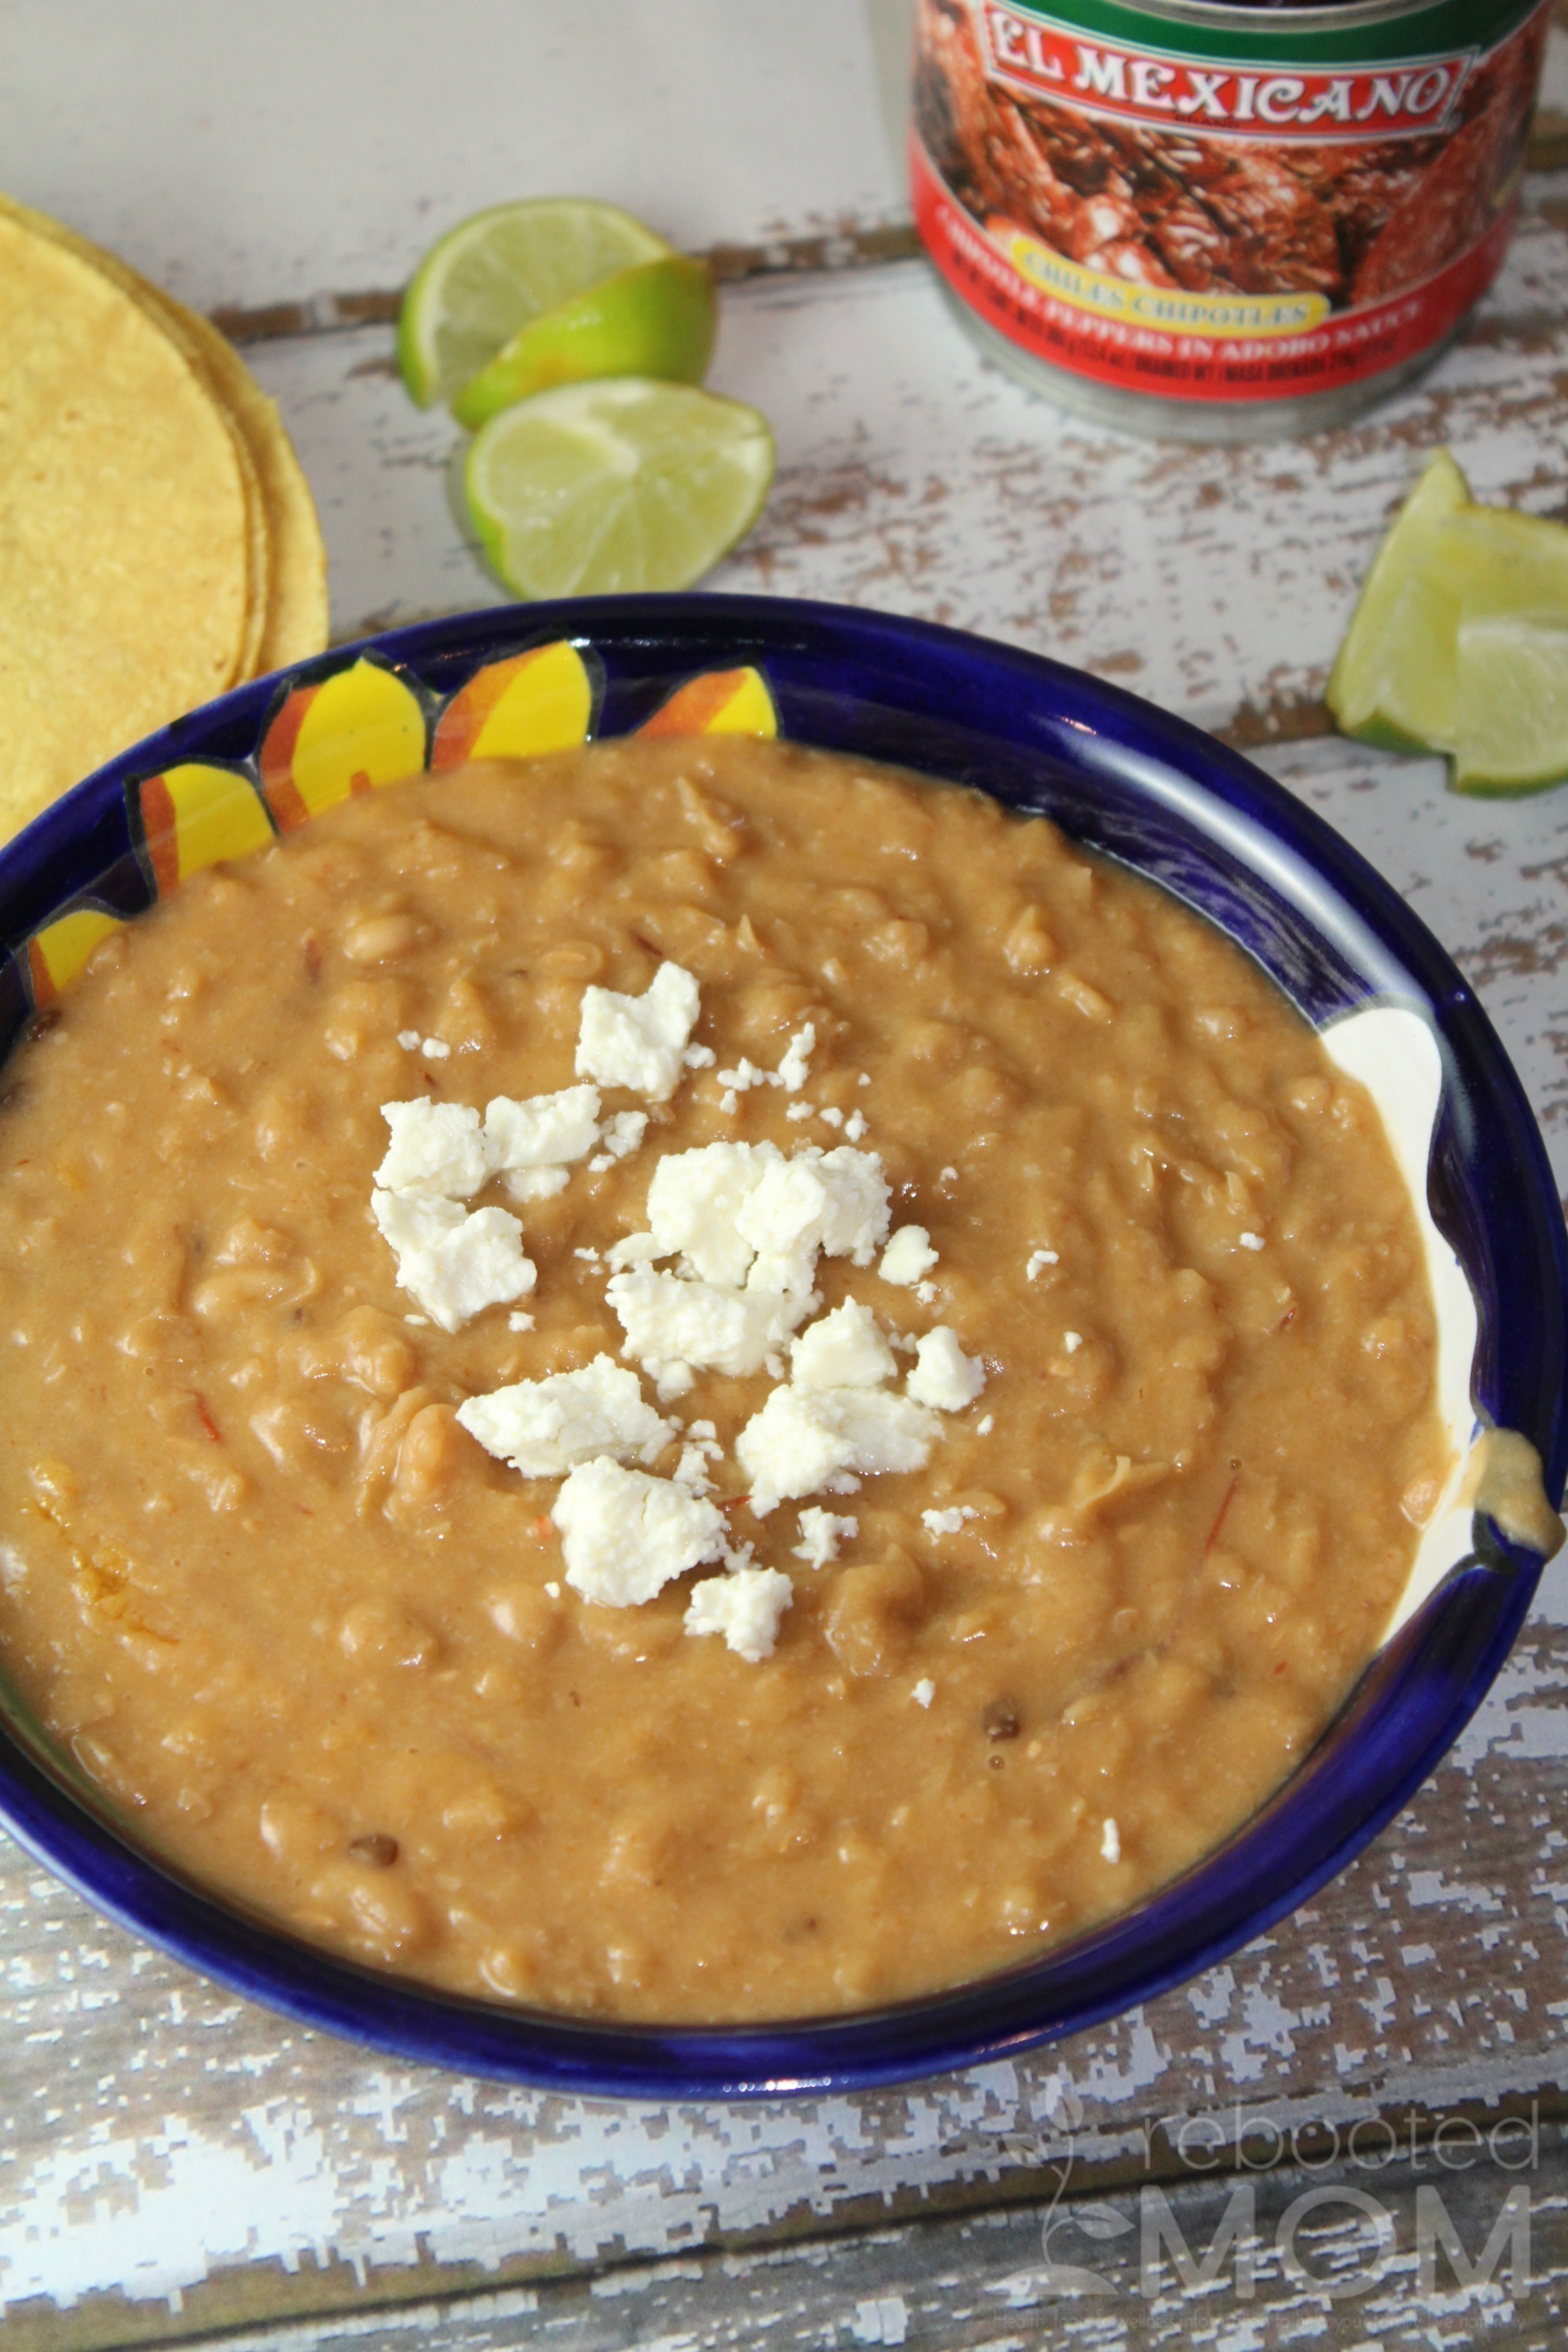 Combine peruano beans with a few chipotle peppers and chipotle sauce to make creamy refried beans with lots of zip that are perfect for burritos, enchiladas, or even for dipping tortilla chips.